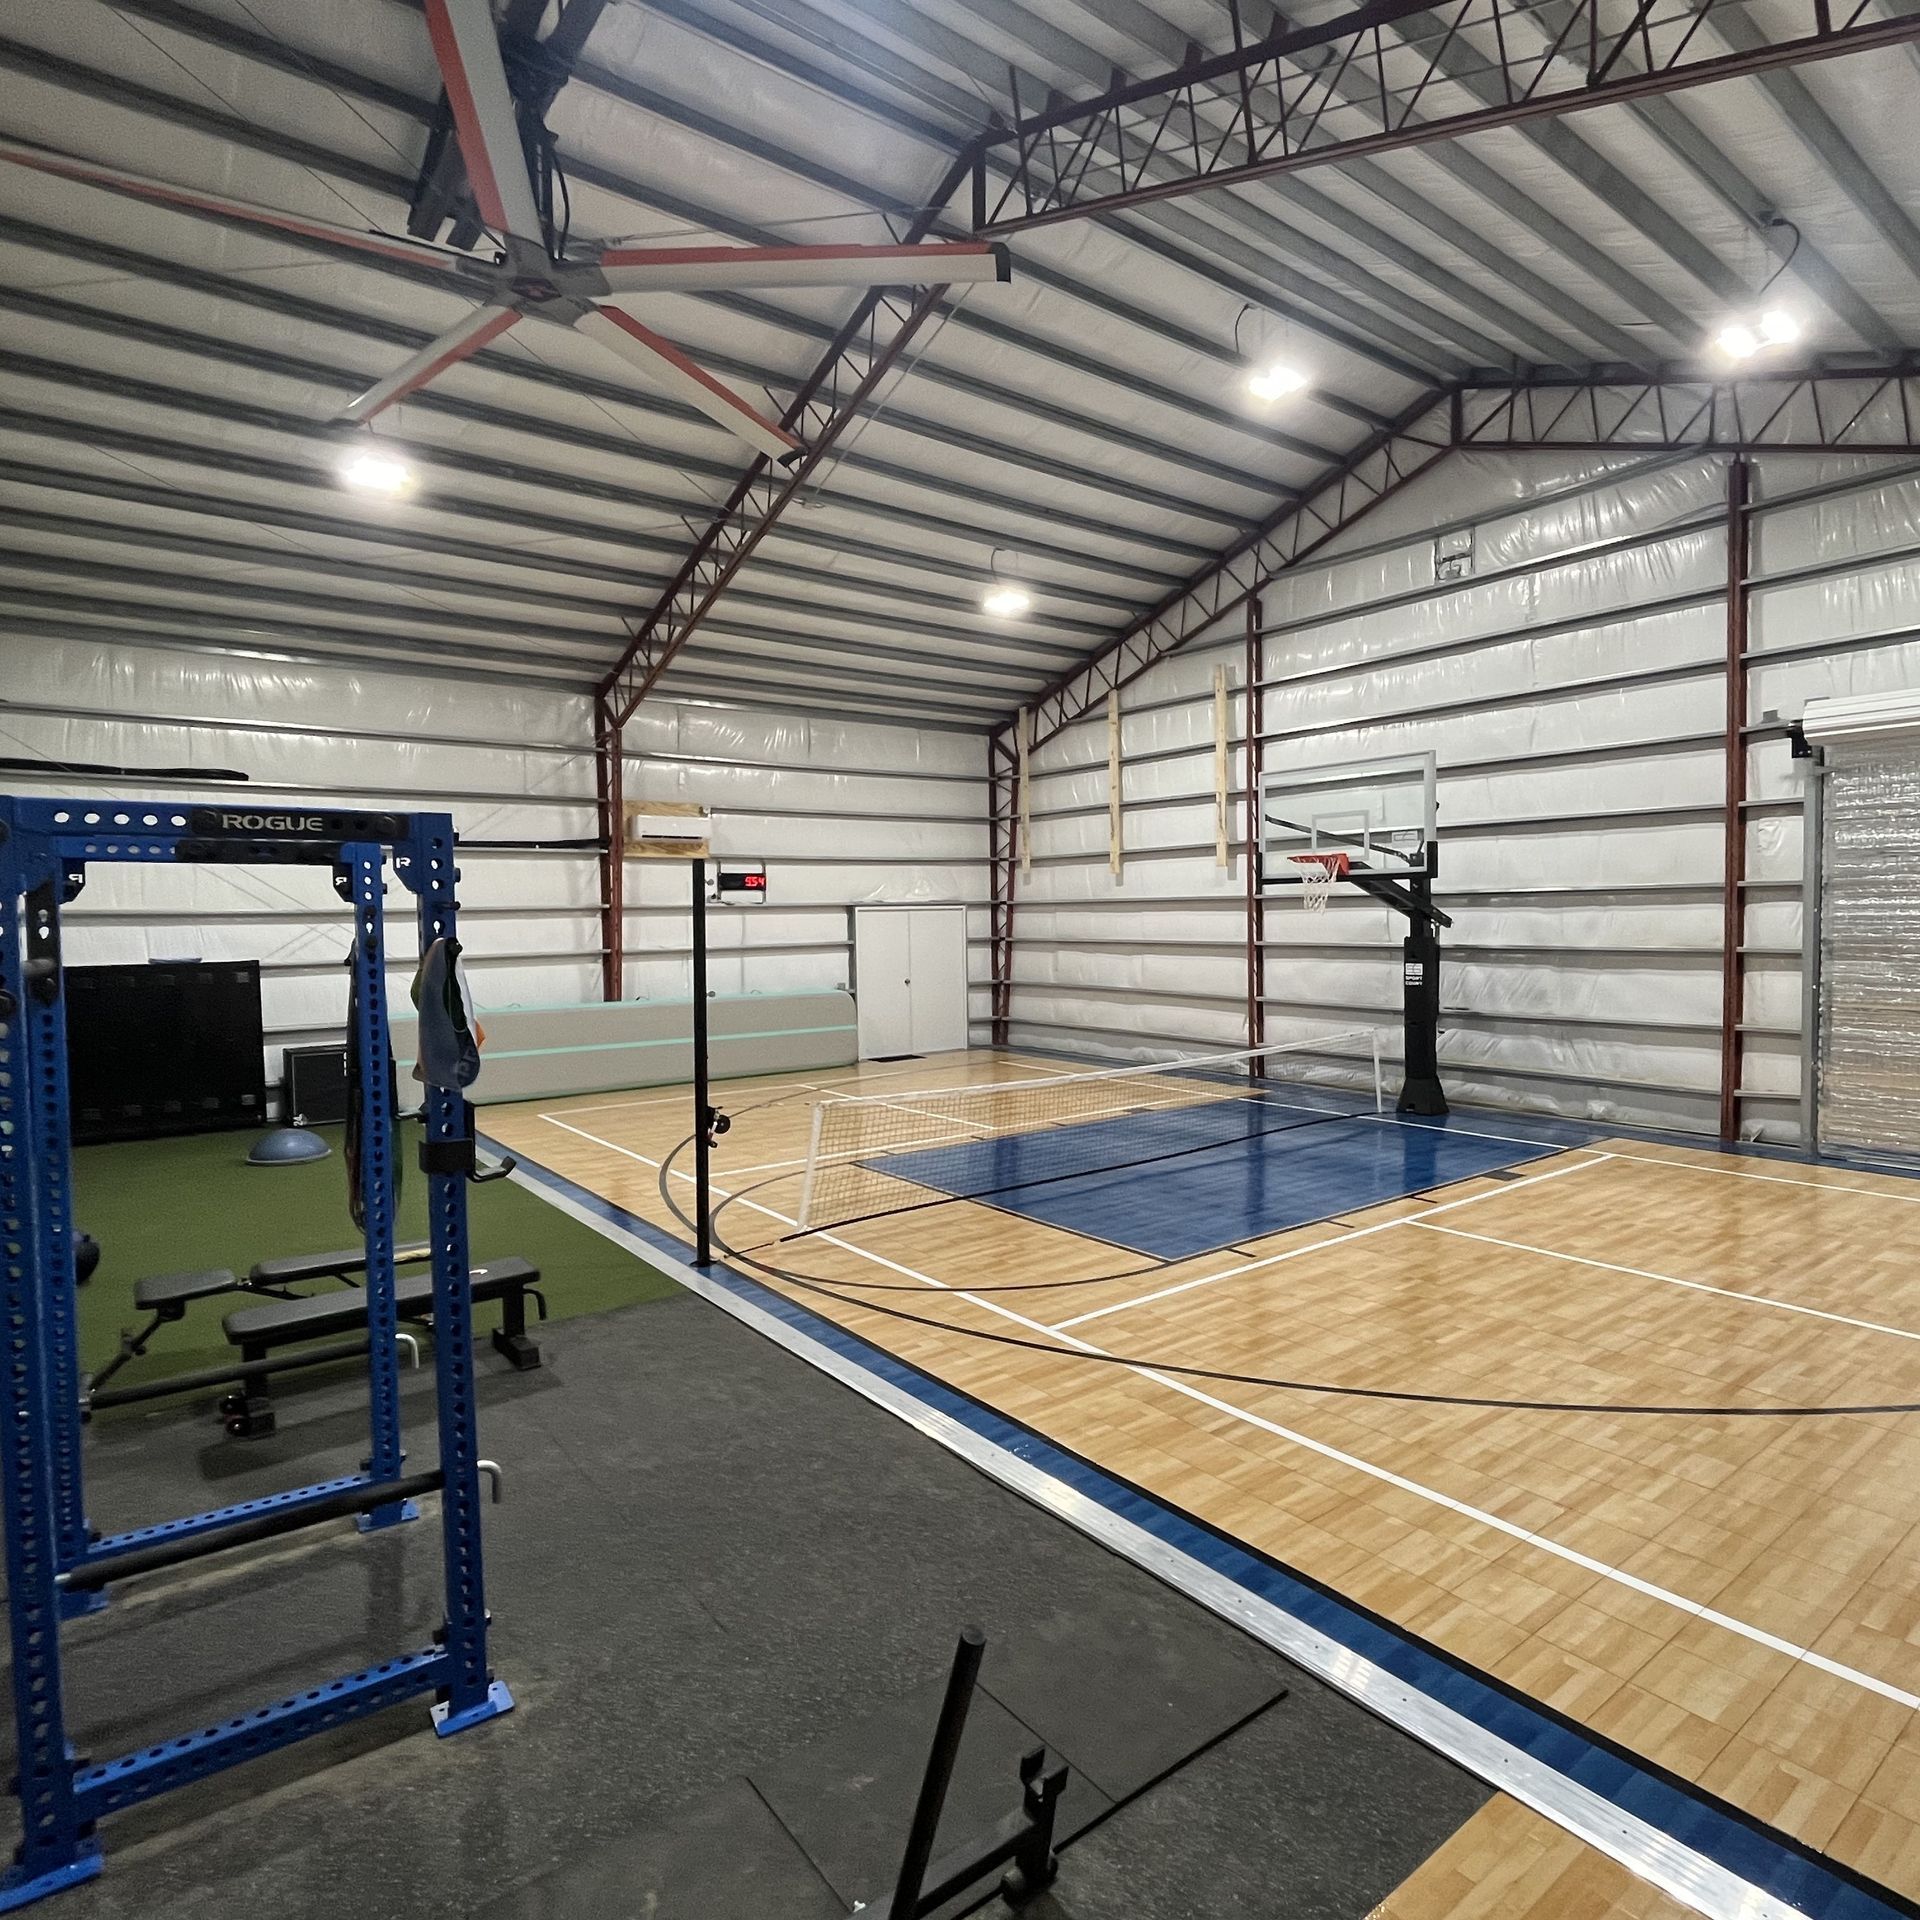 Metal & Steel Building Kits Ship to Kentucky, North and South Carolina, Ohio, Florida, Tennessee, Missouri, West Virginia, all 50 States, for Recreational Facilities